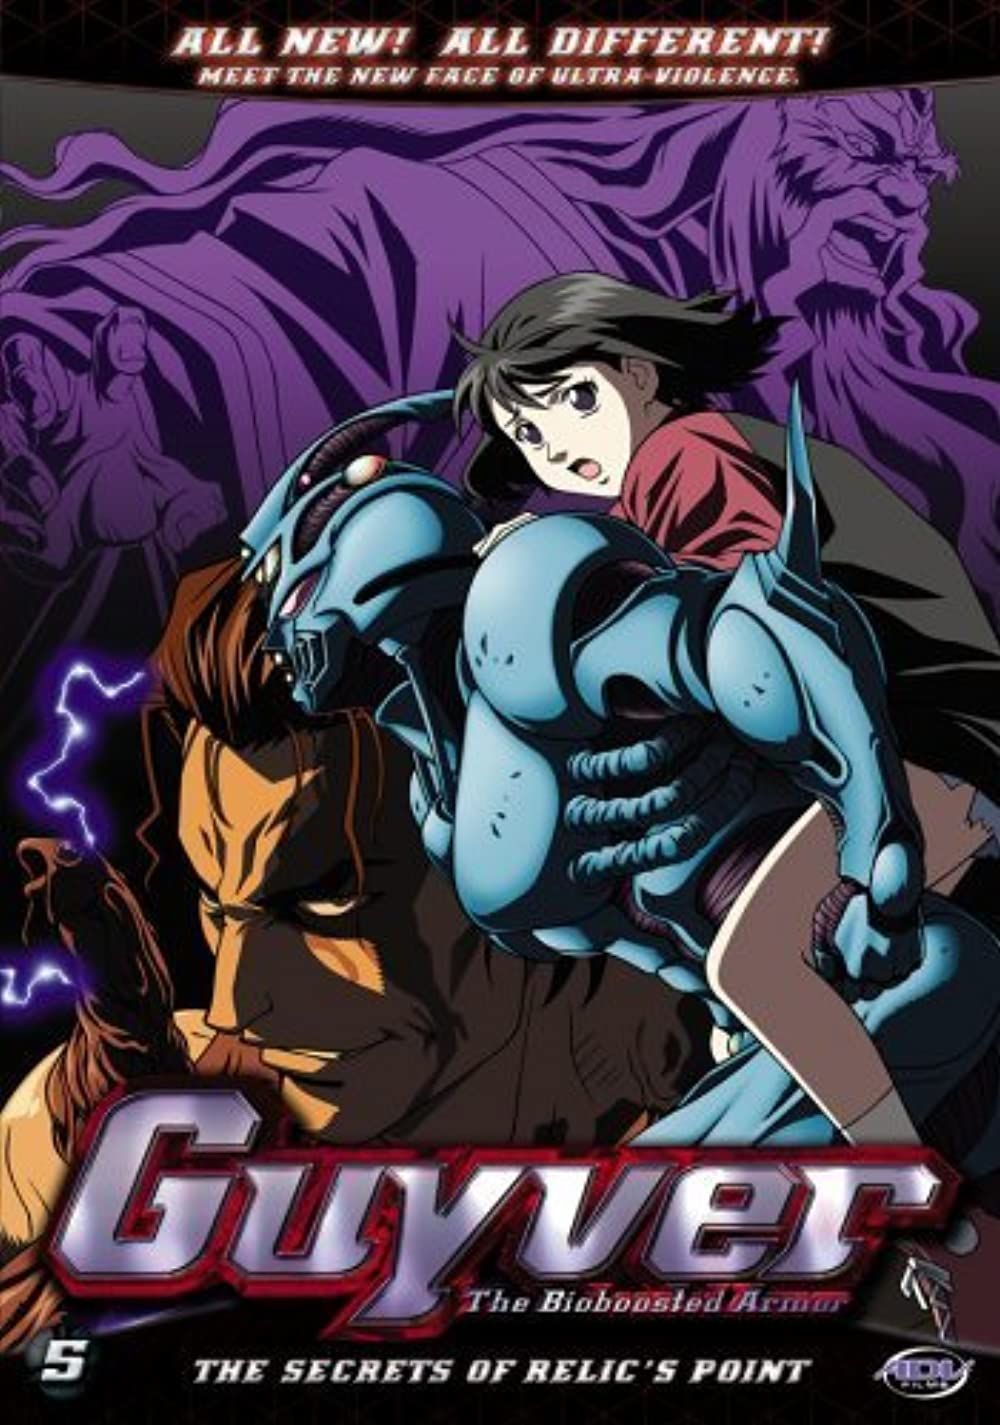 Watch Guyver: The Bioboosted Armor Season 1 Episode 1 - The Wondrous  Bio-Boosted Armor Online Now